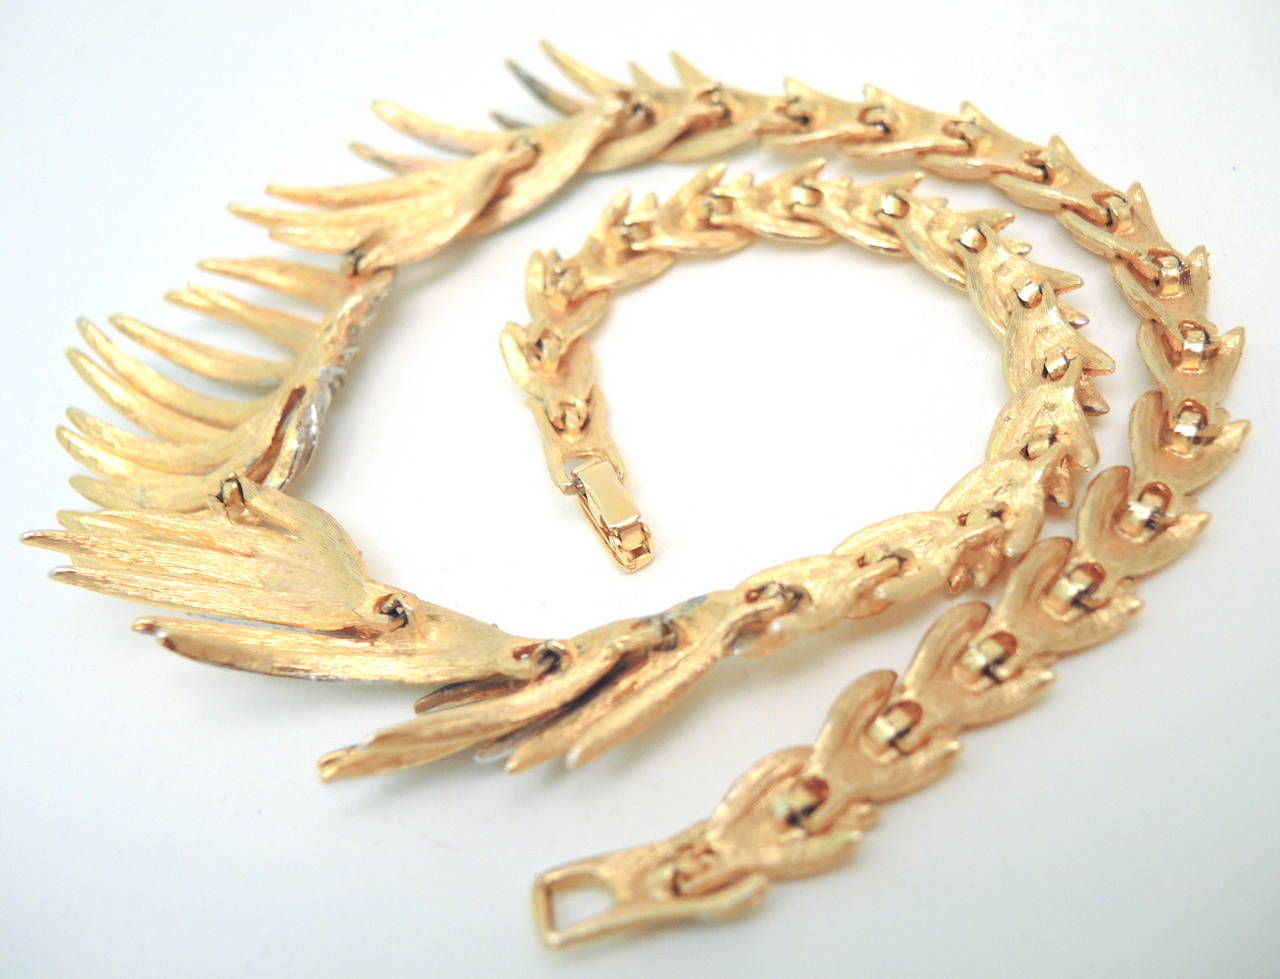 This vintage classic and collectible Trifari necklace features clear rhinestones in a gold-tone setting. This Trifari necklace measures 19” x 1 1/4” wide at the front and has a fold-over closure.